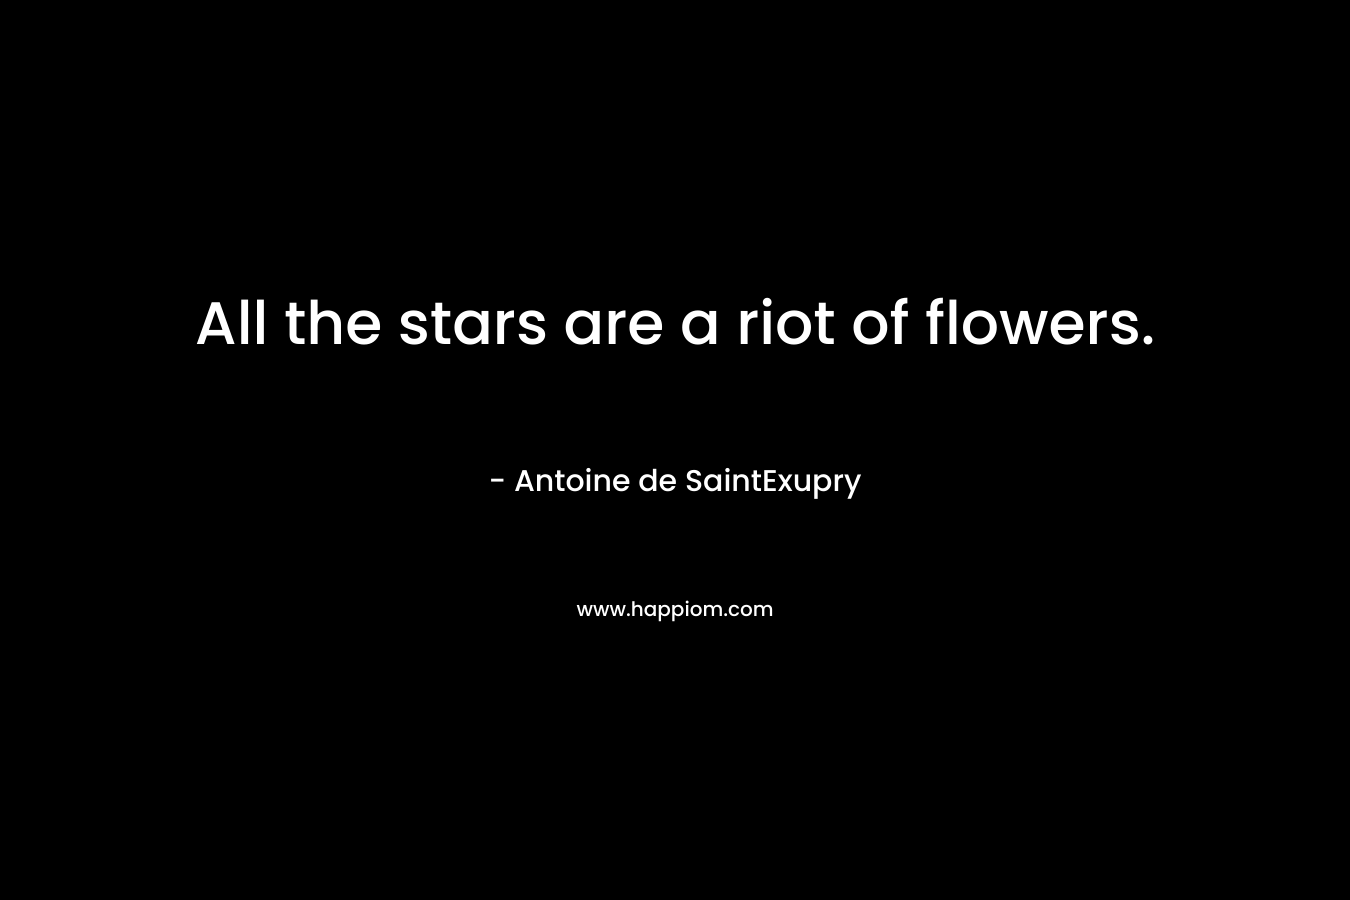 All the stars are a riot of flowers. – Antoine de SaintExupry